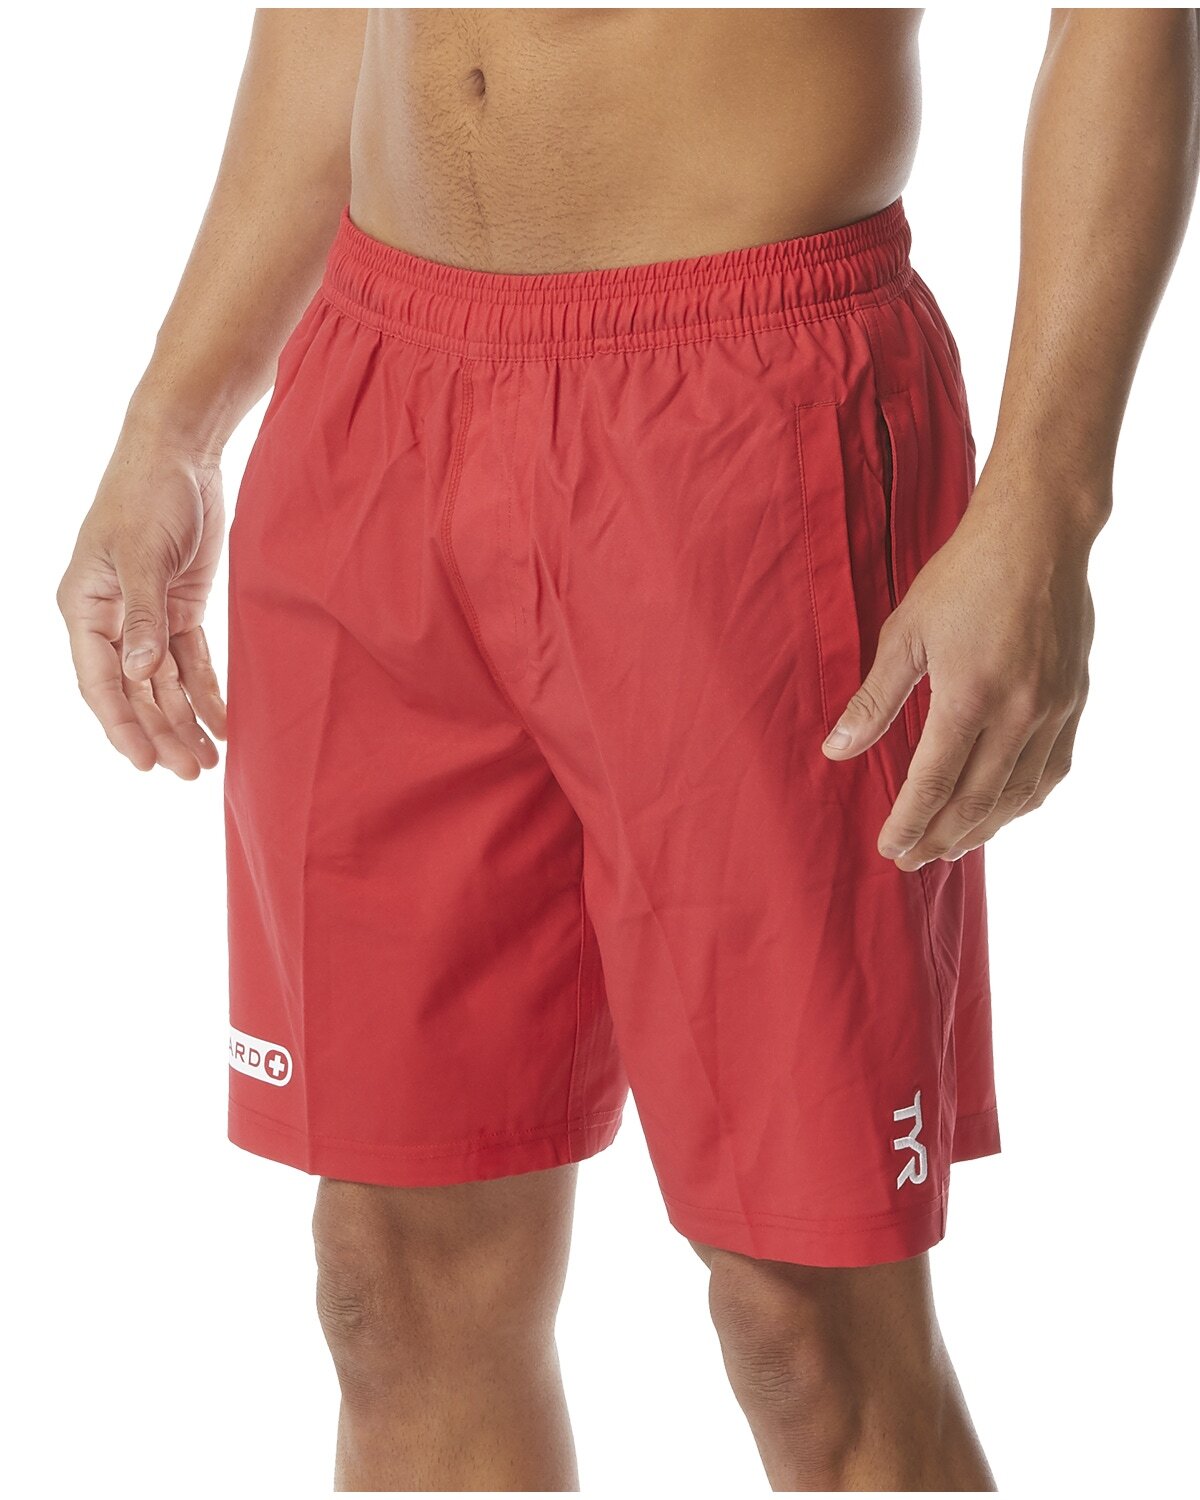 TYR Large Red Men's Guard Land to Water Short